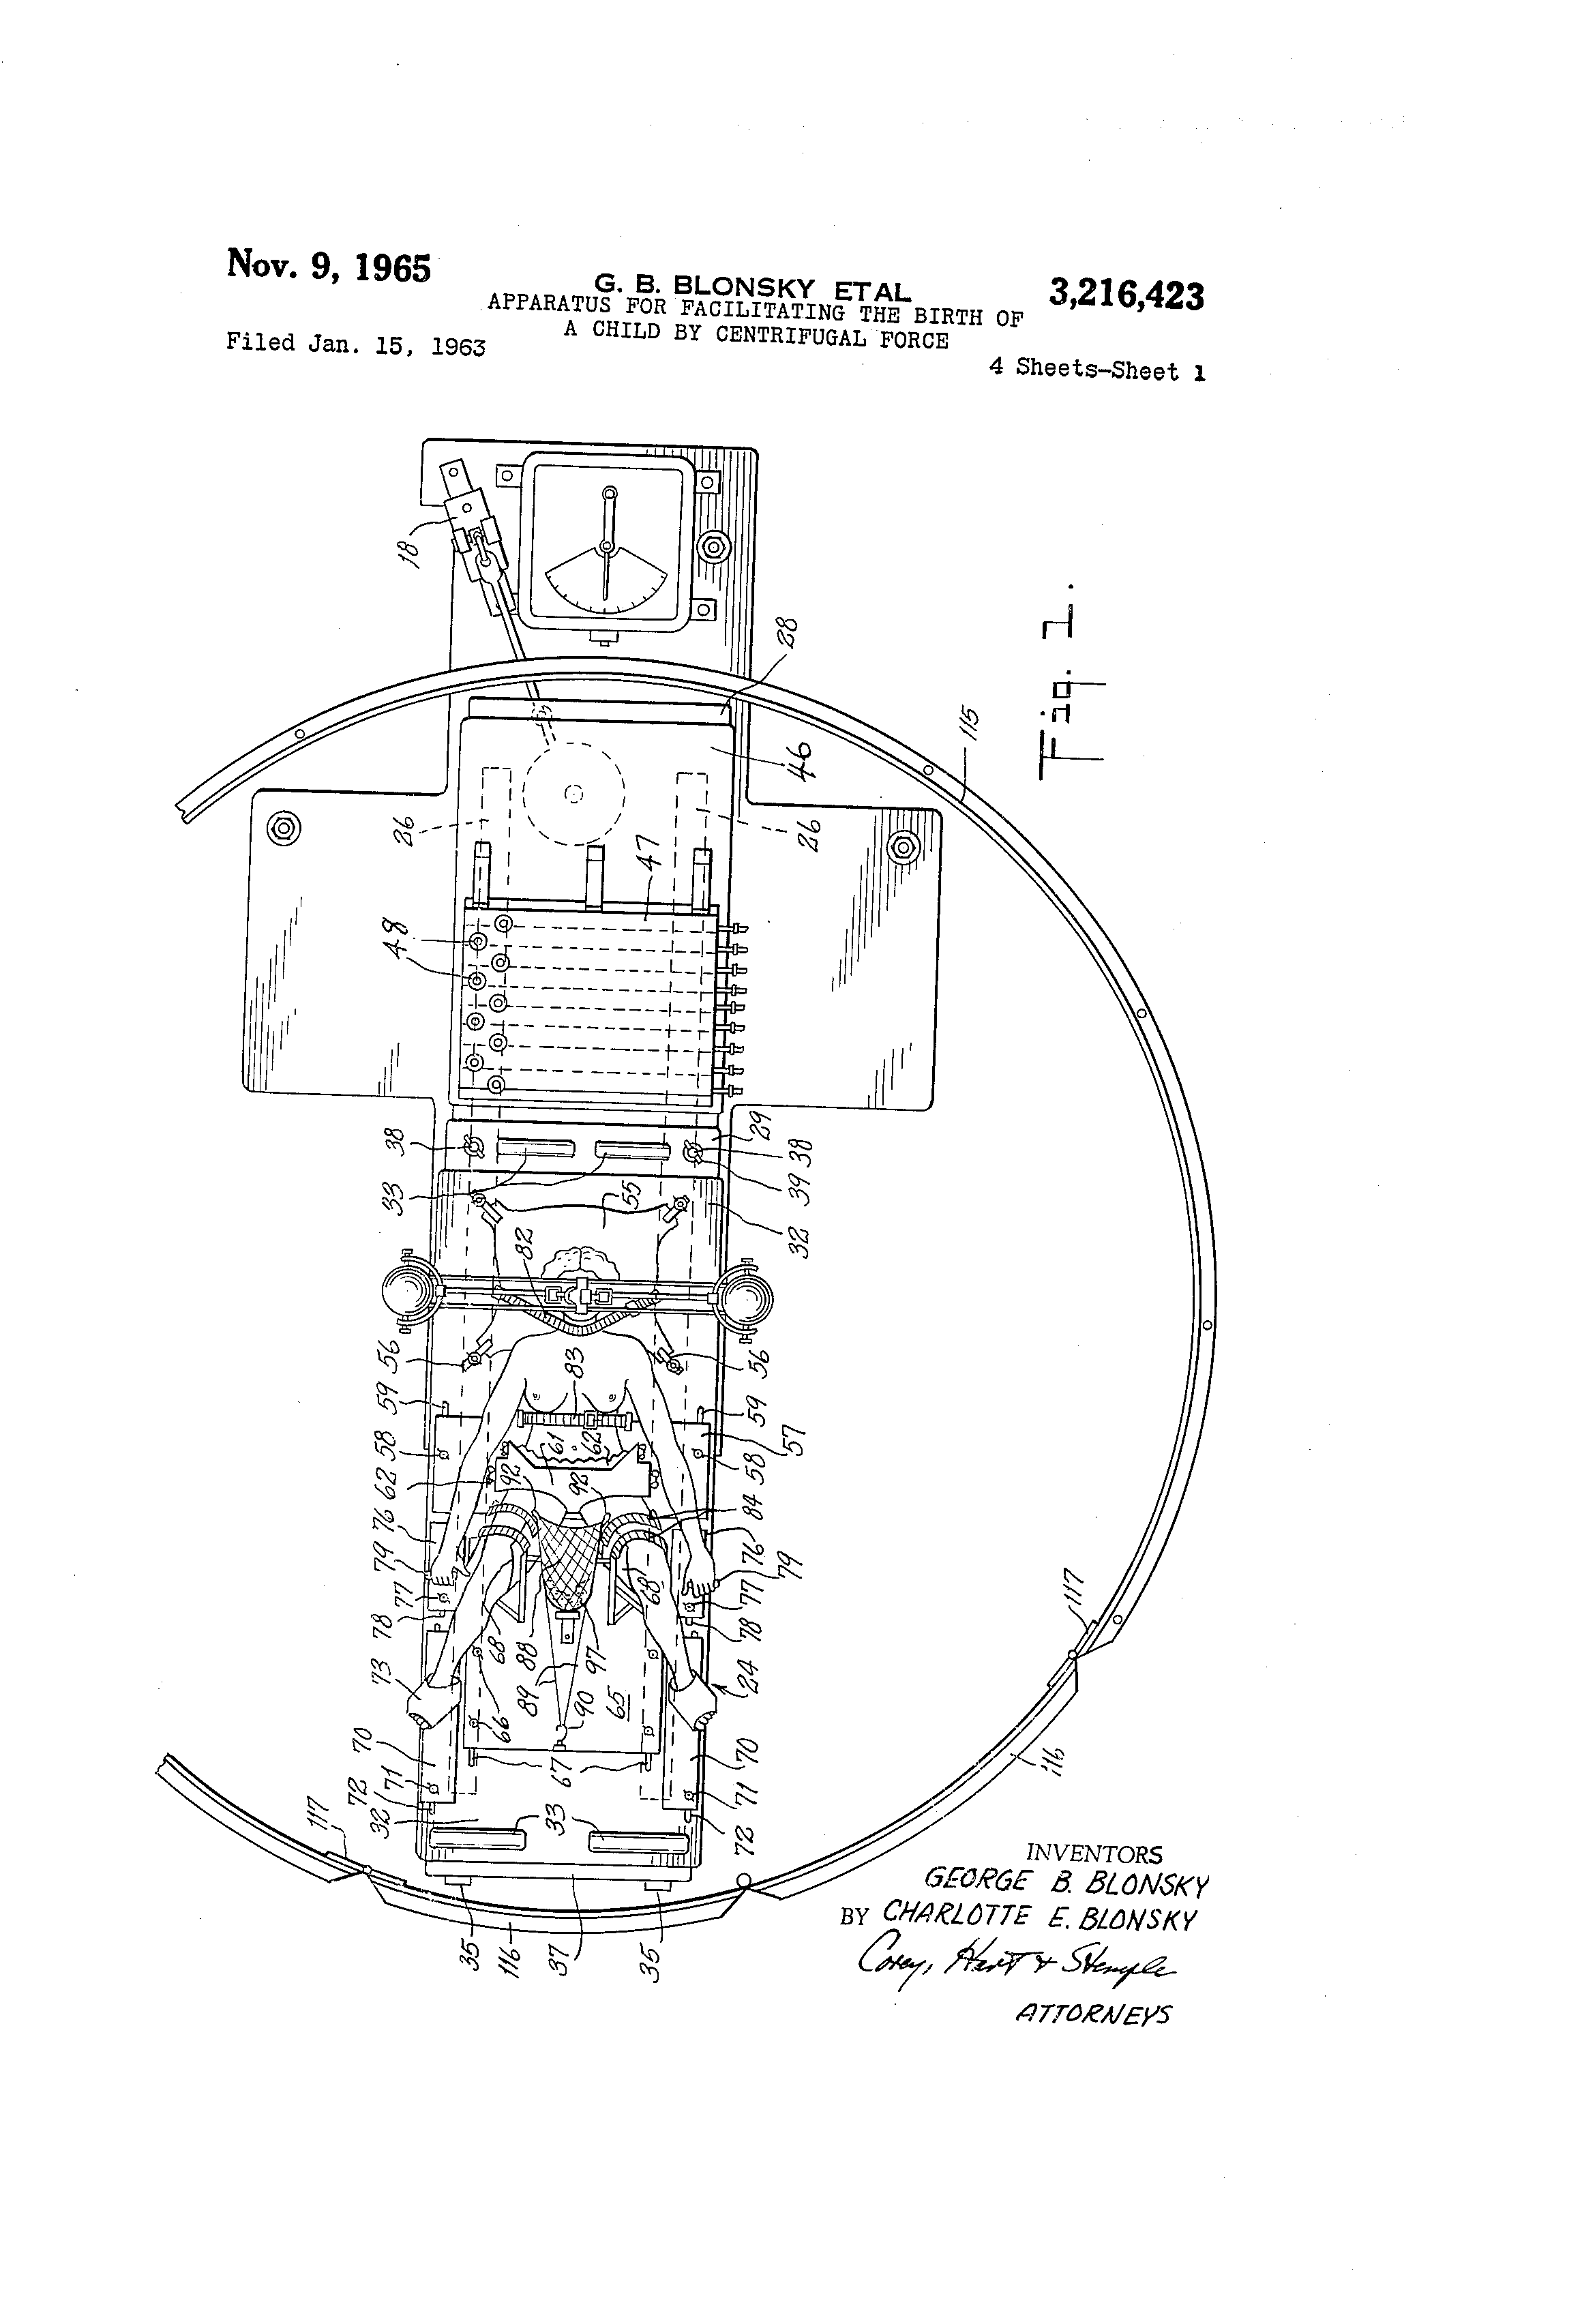 A patent for the Blonsky device